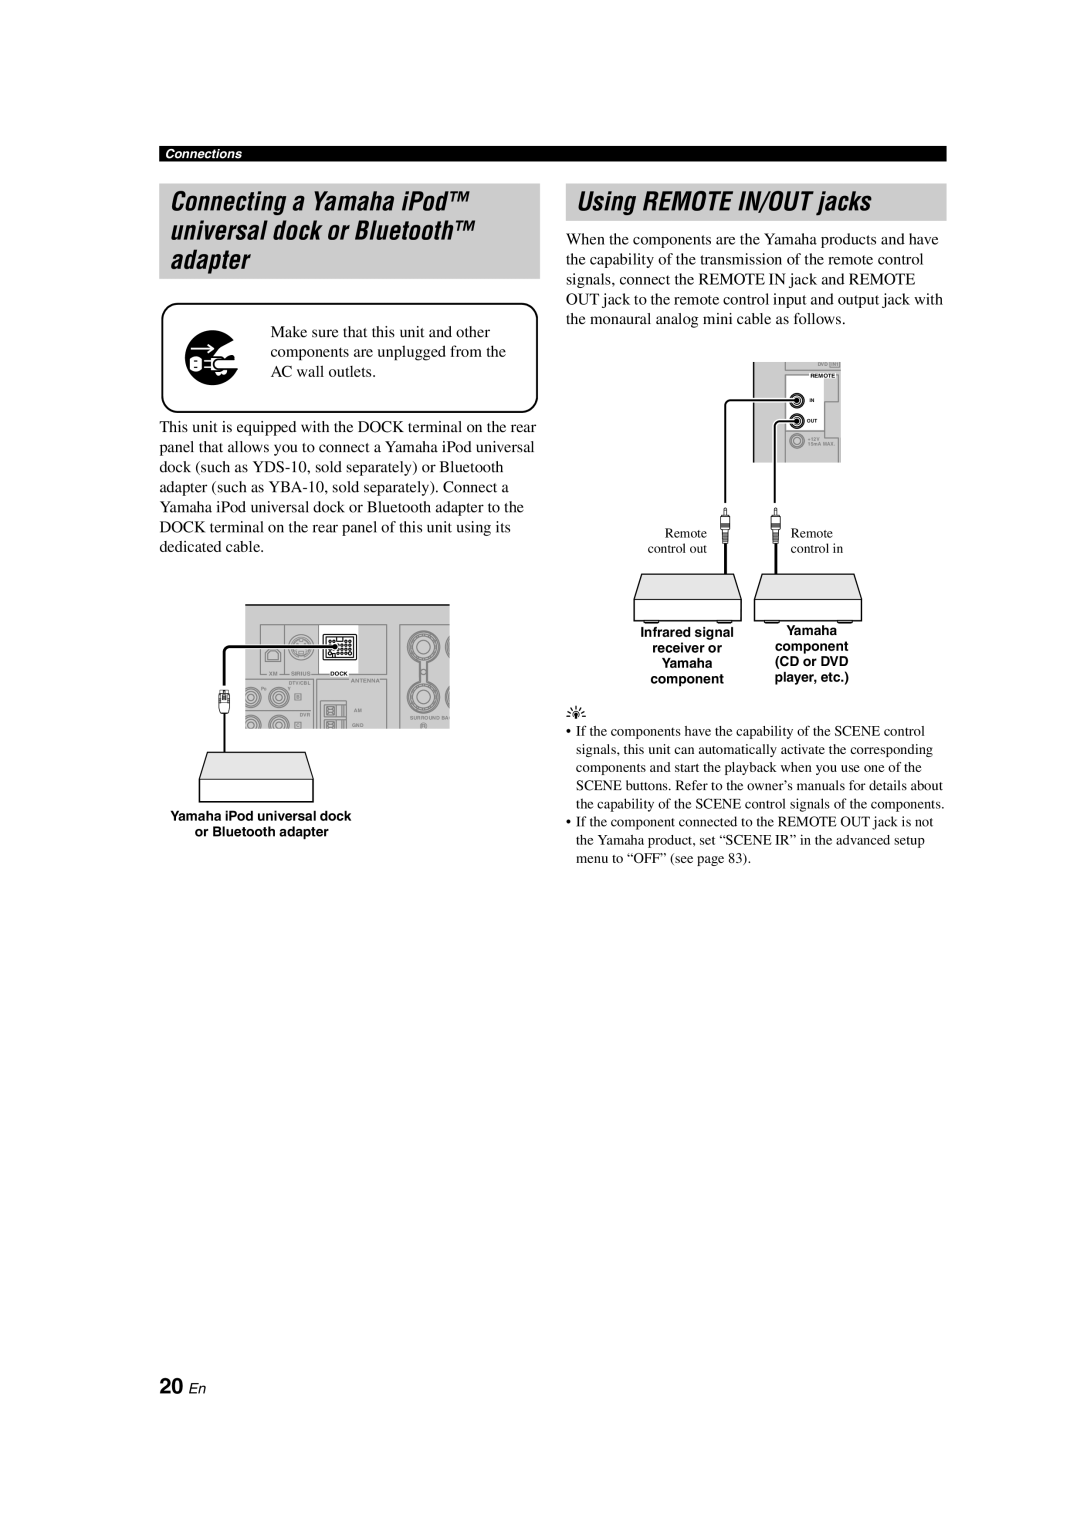 Yamaha RX-V563 owner manual Connecting a Yamaha iPod universal dock or Bluetooth adapter, Using REMOTE IN/OUT jacks, 20 En 